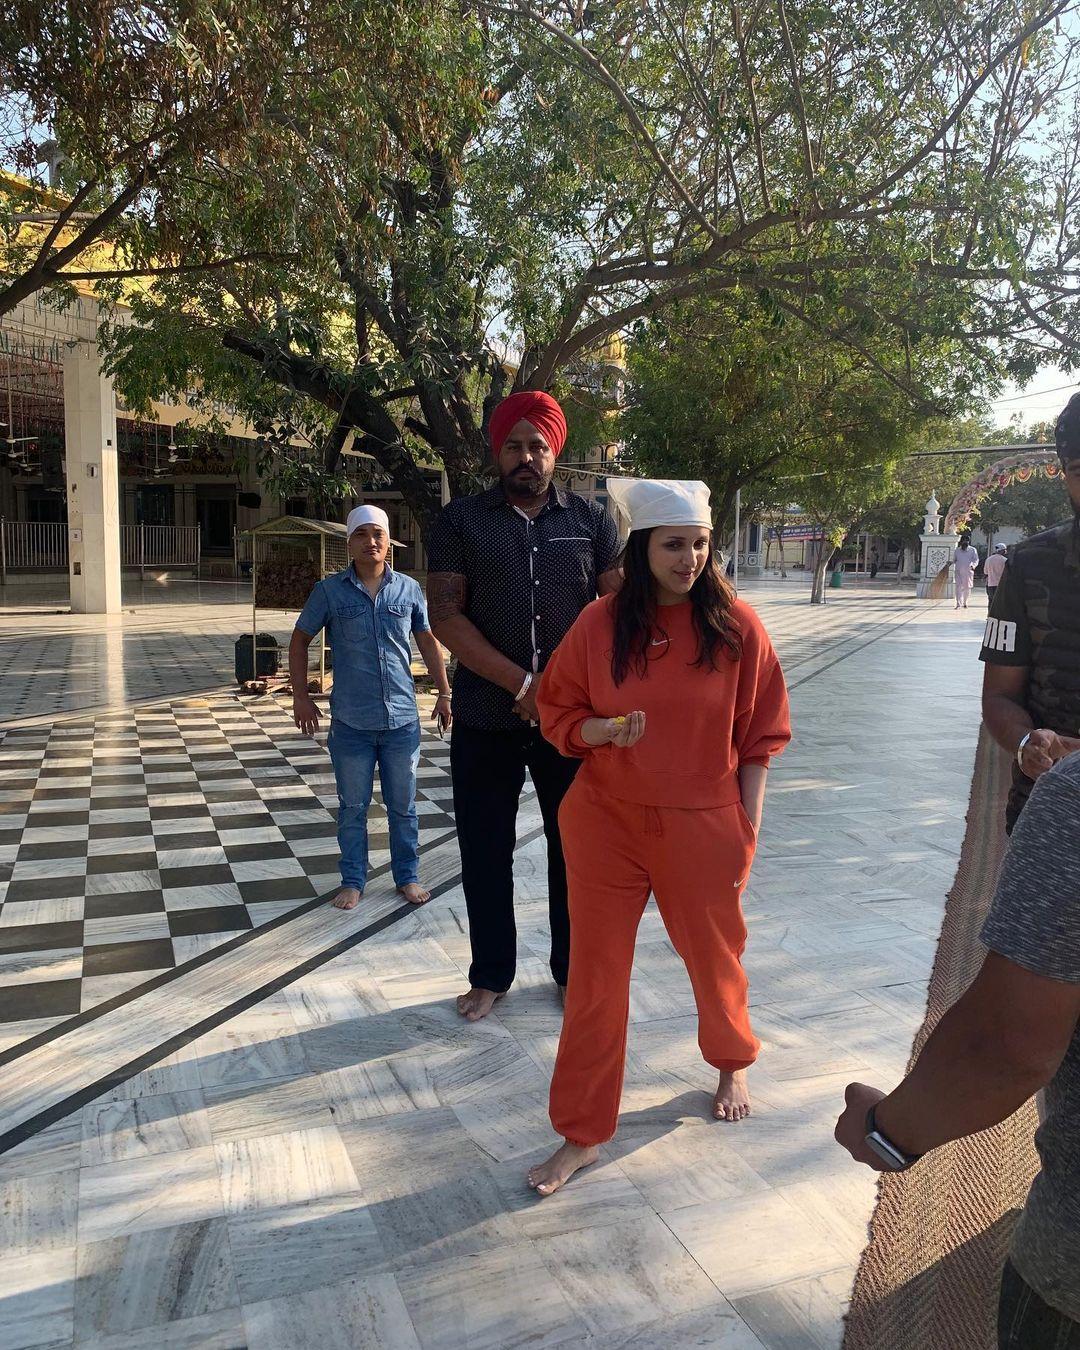 This is a picture from Parineeti's visit to Gurudwara